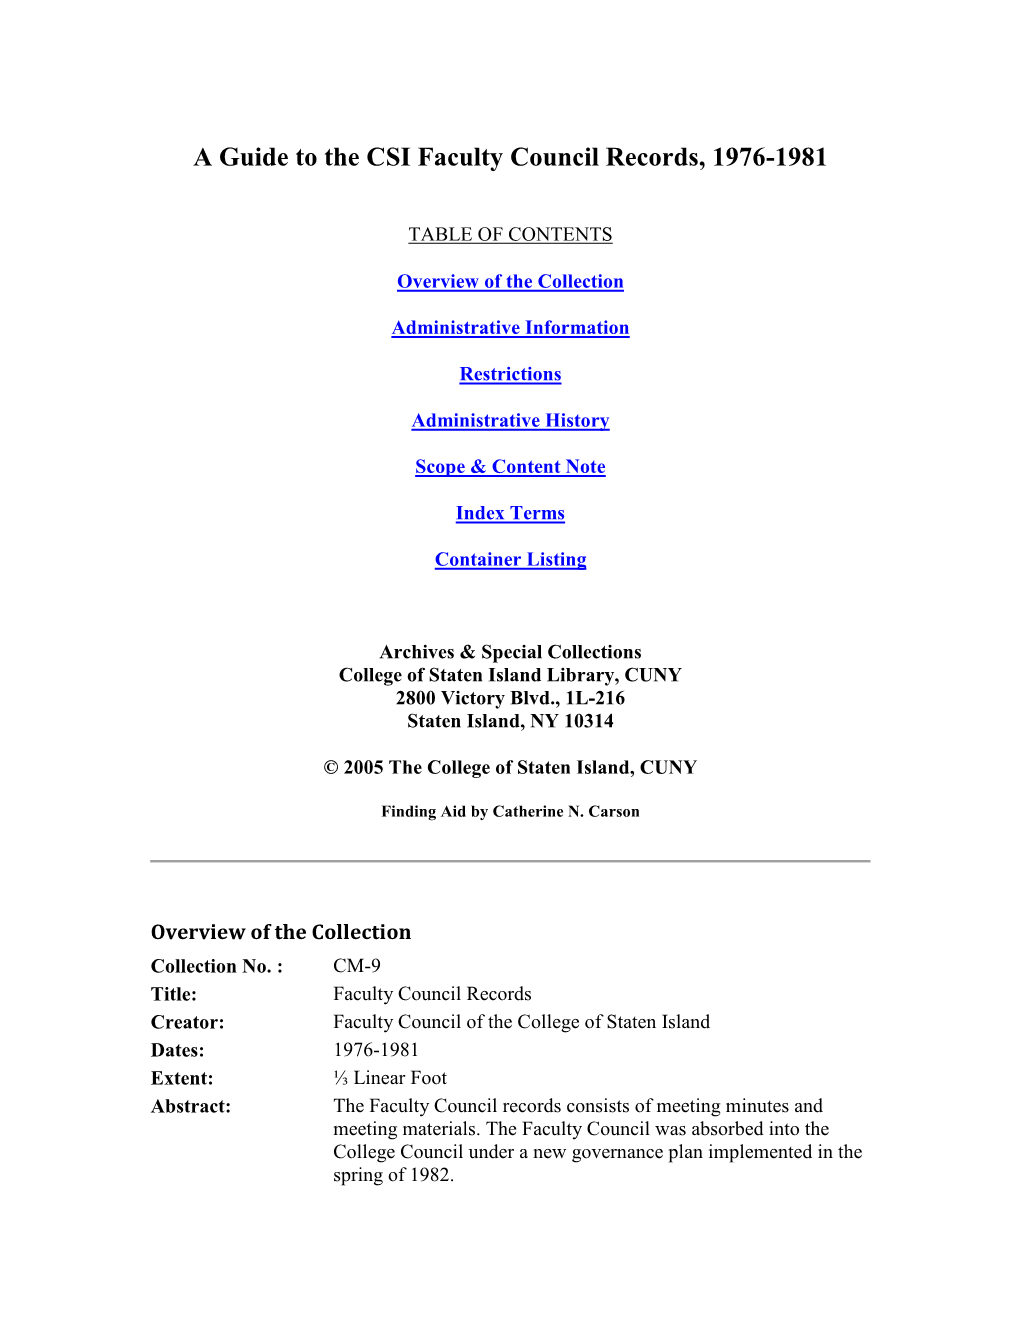 A Guide to the CSI Faculty Council Records, 1976-1981